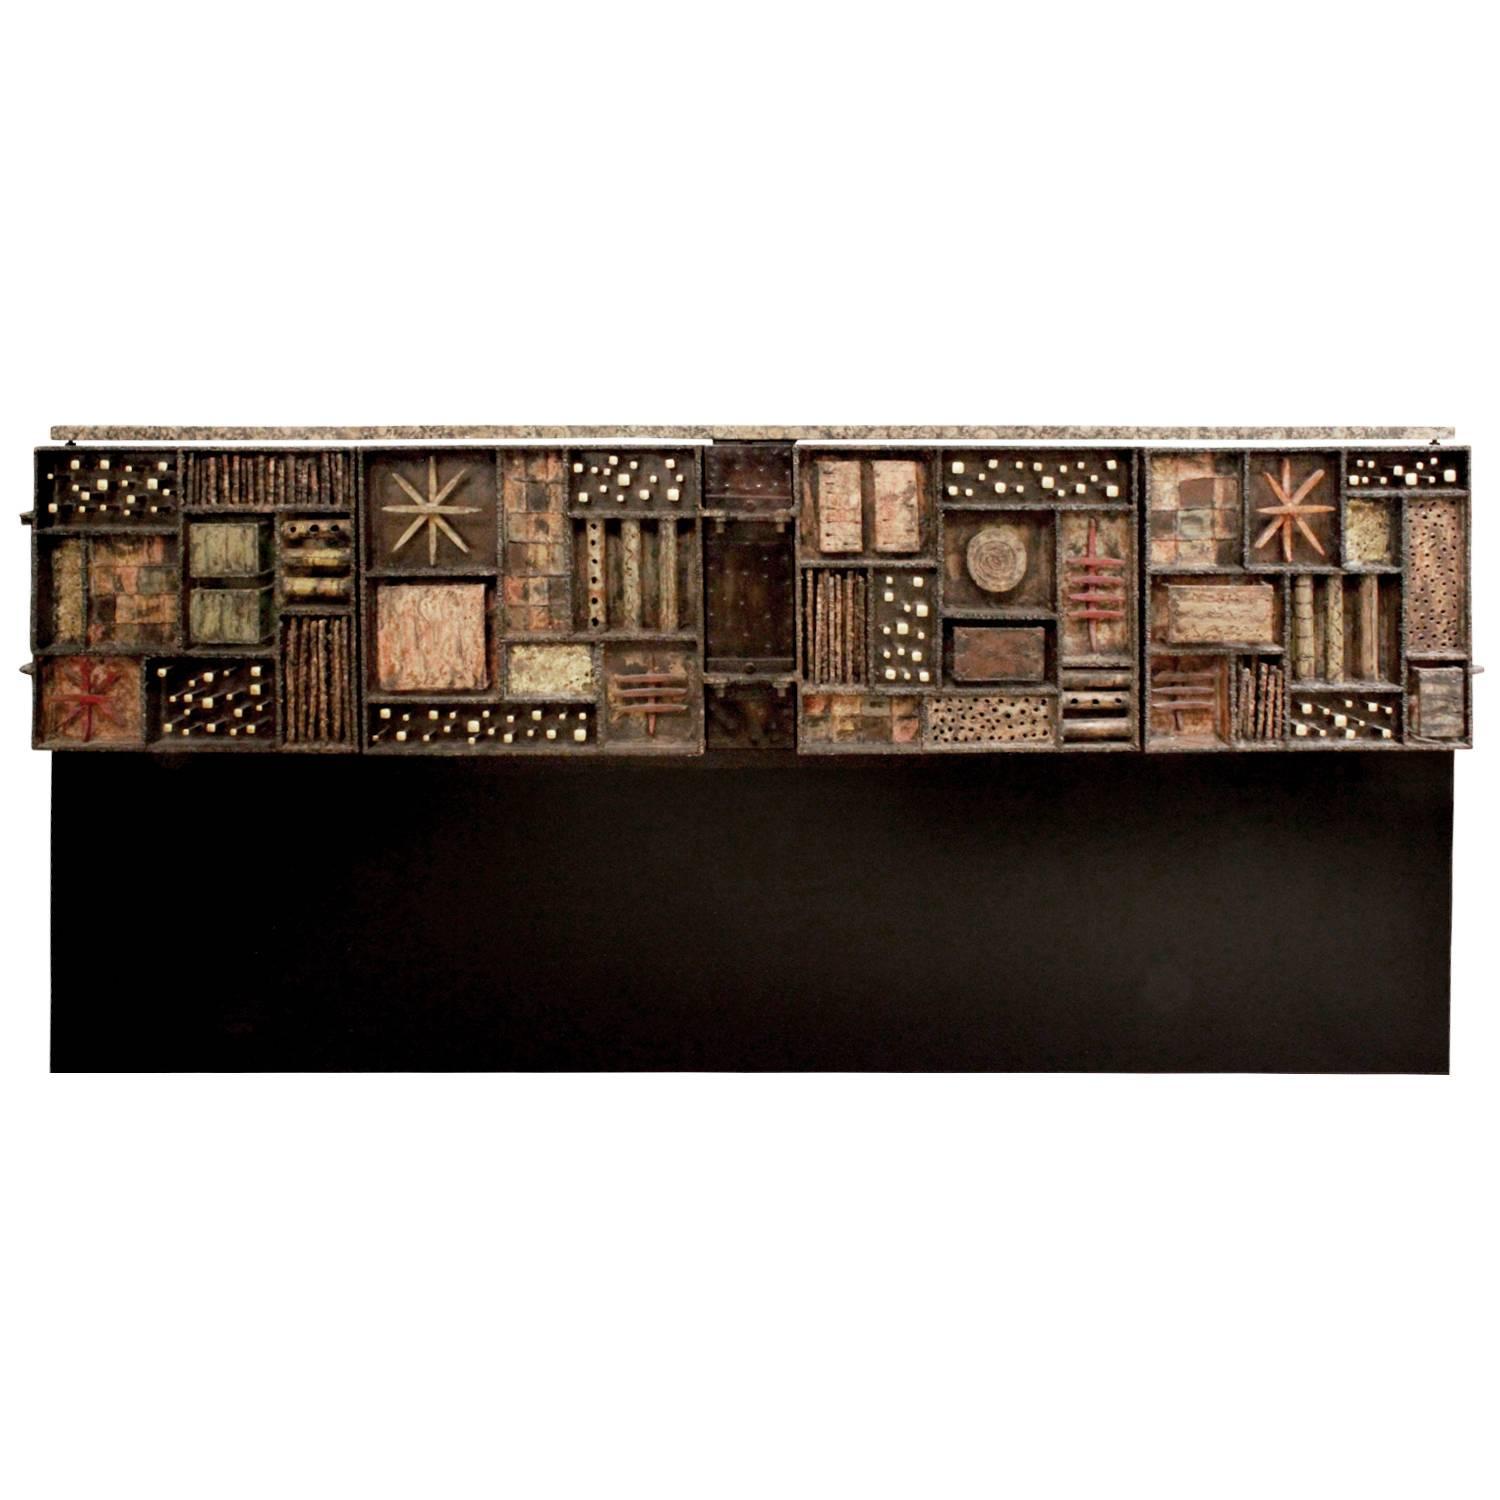 Forged front four-door cabinet in welded and patinated steel, color pigments, 24-karat gold leaf, painted wood with granite top by Paul Evans, American 1979. This piece comes with the original invoice from The Paul Evans Studio. It was designed for